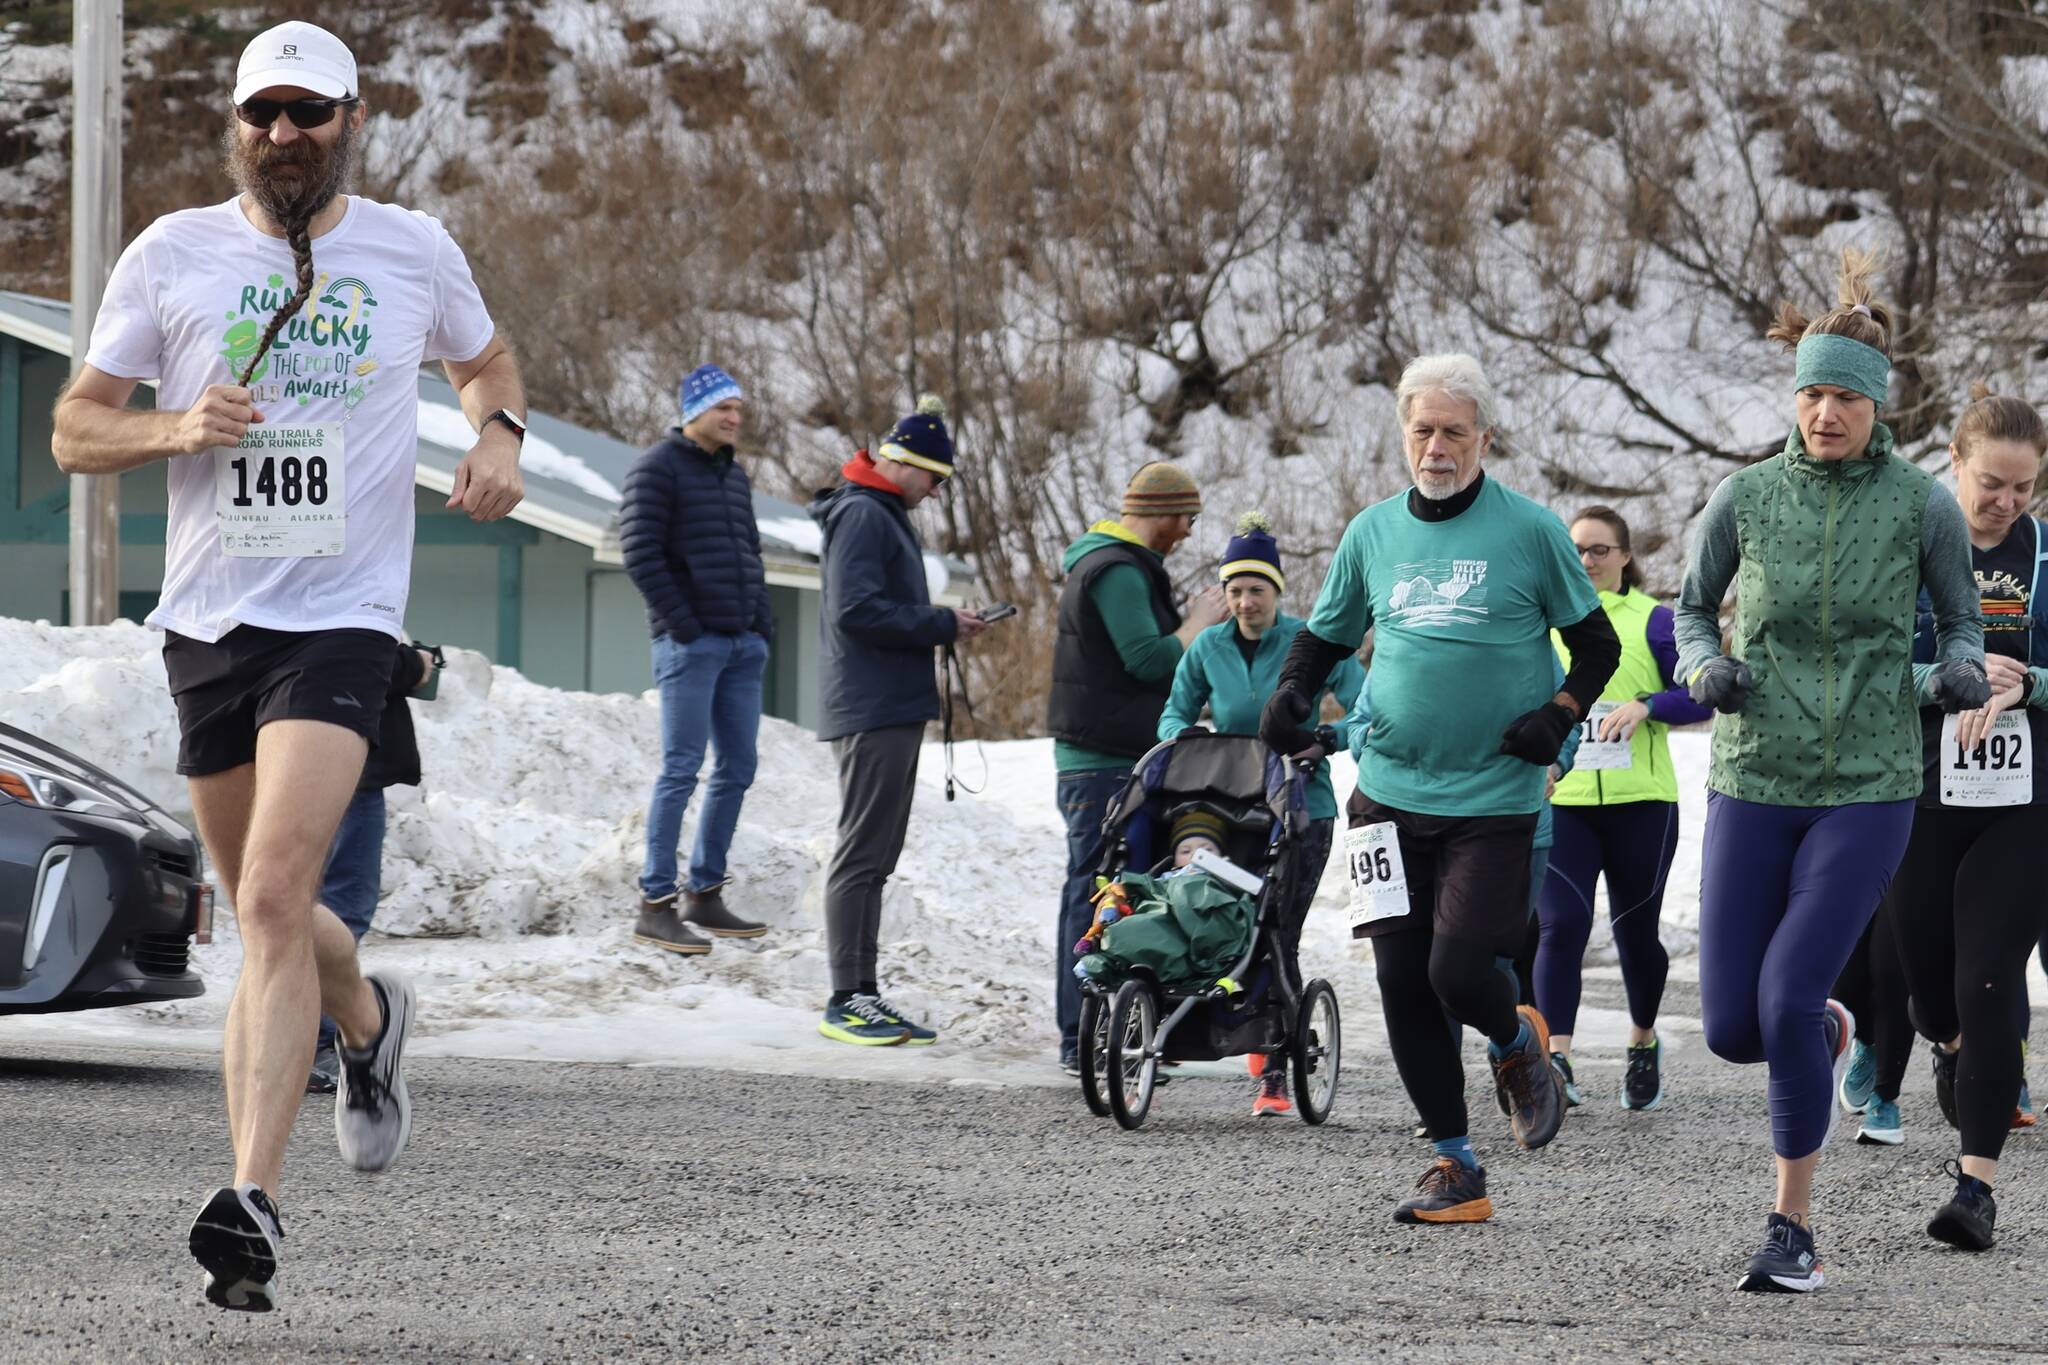 Eric Antrim (1488) leads the pack on Saturday for JTRR’s annual Flanagan’s Run at Savikko Park. Antrim would later finish the 5-mile option of the race first with a finish time of 34:07. (Jonson Kuhn / Juneau Empire)